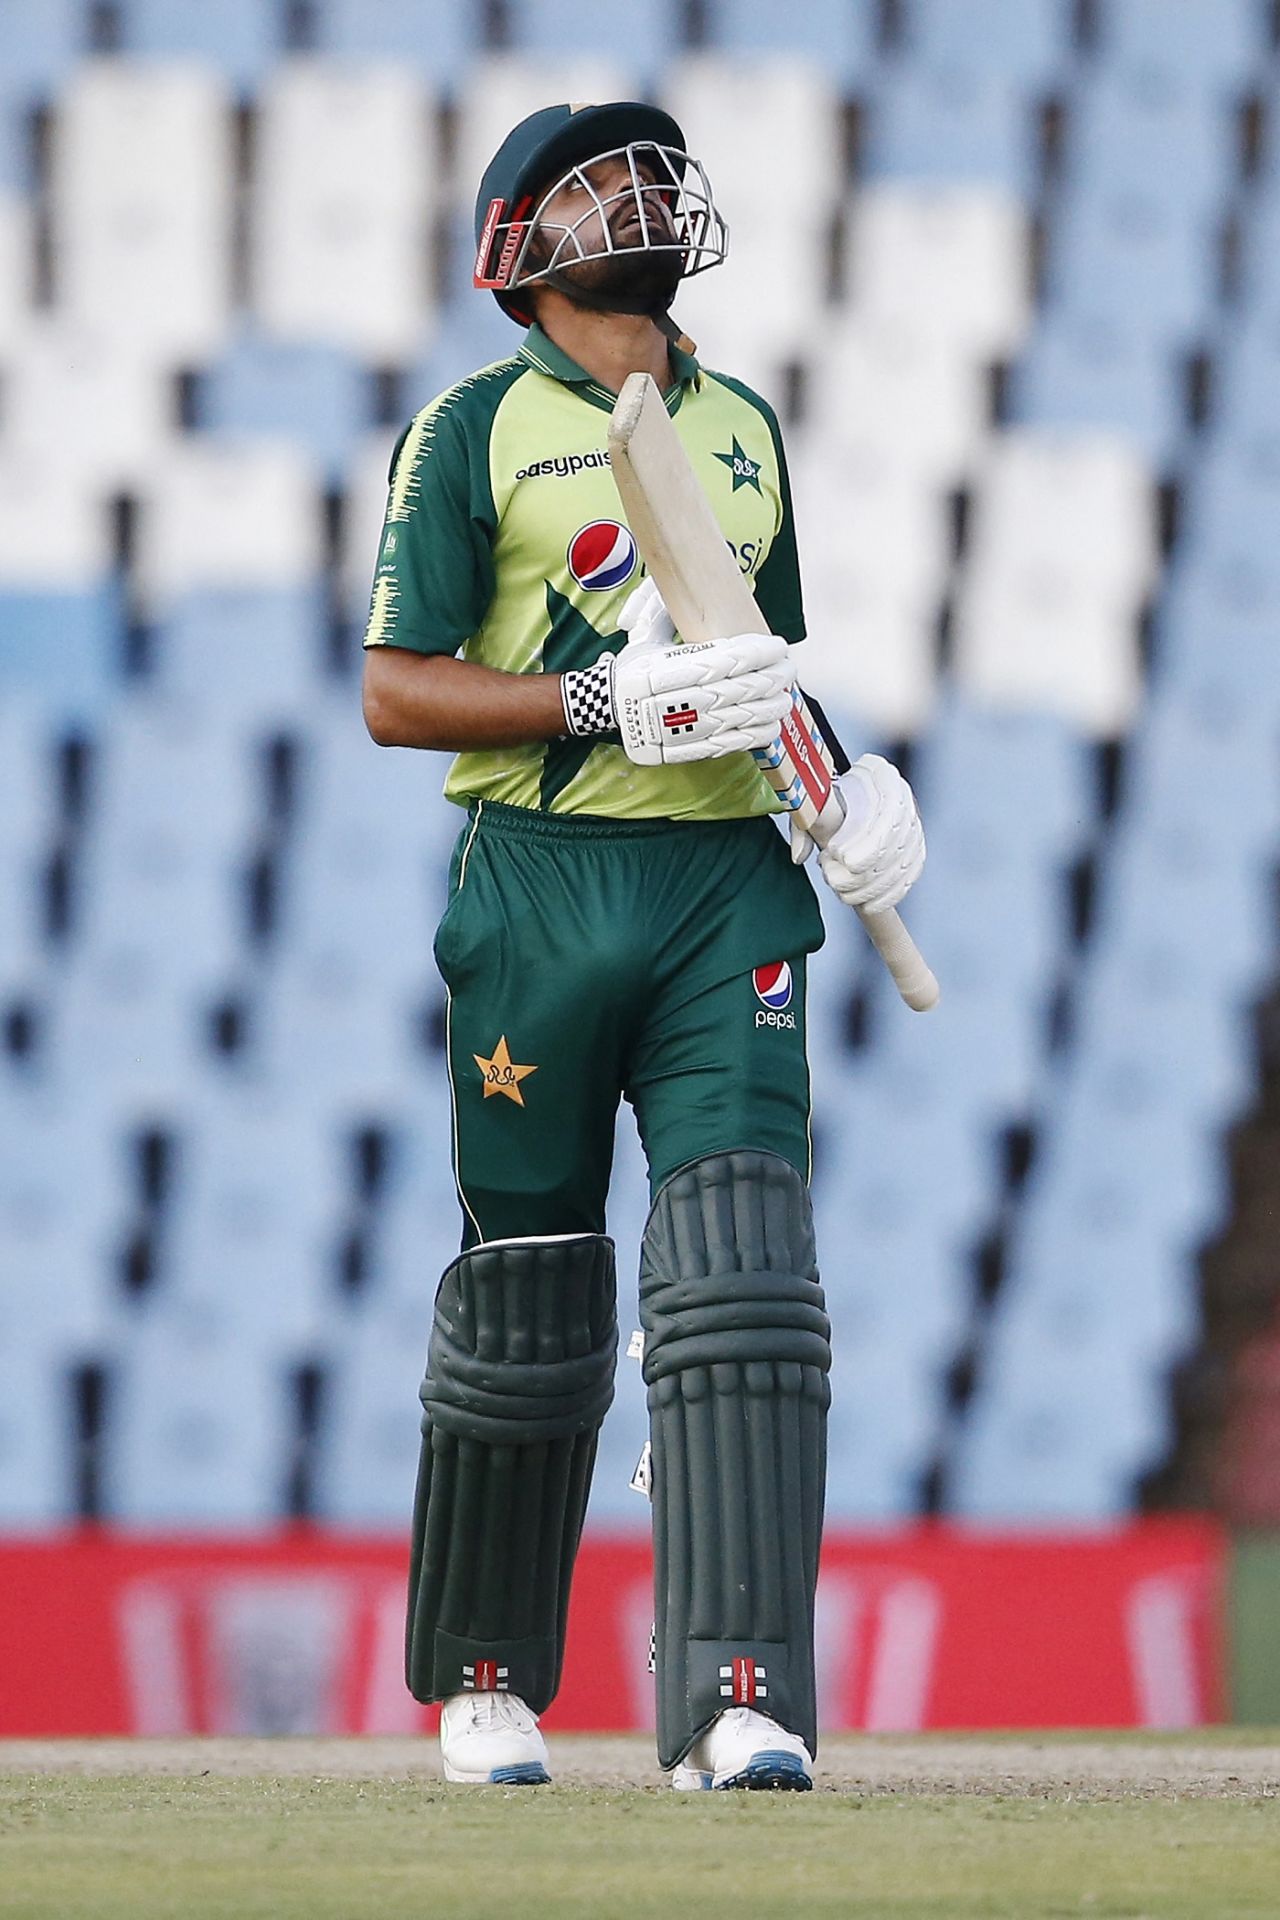 Babar Azam reached his fifty in 27 balls, South Africa vs Pakistan, 3rd T20I, Centurion, April 14, 2021r